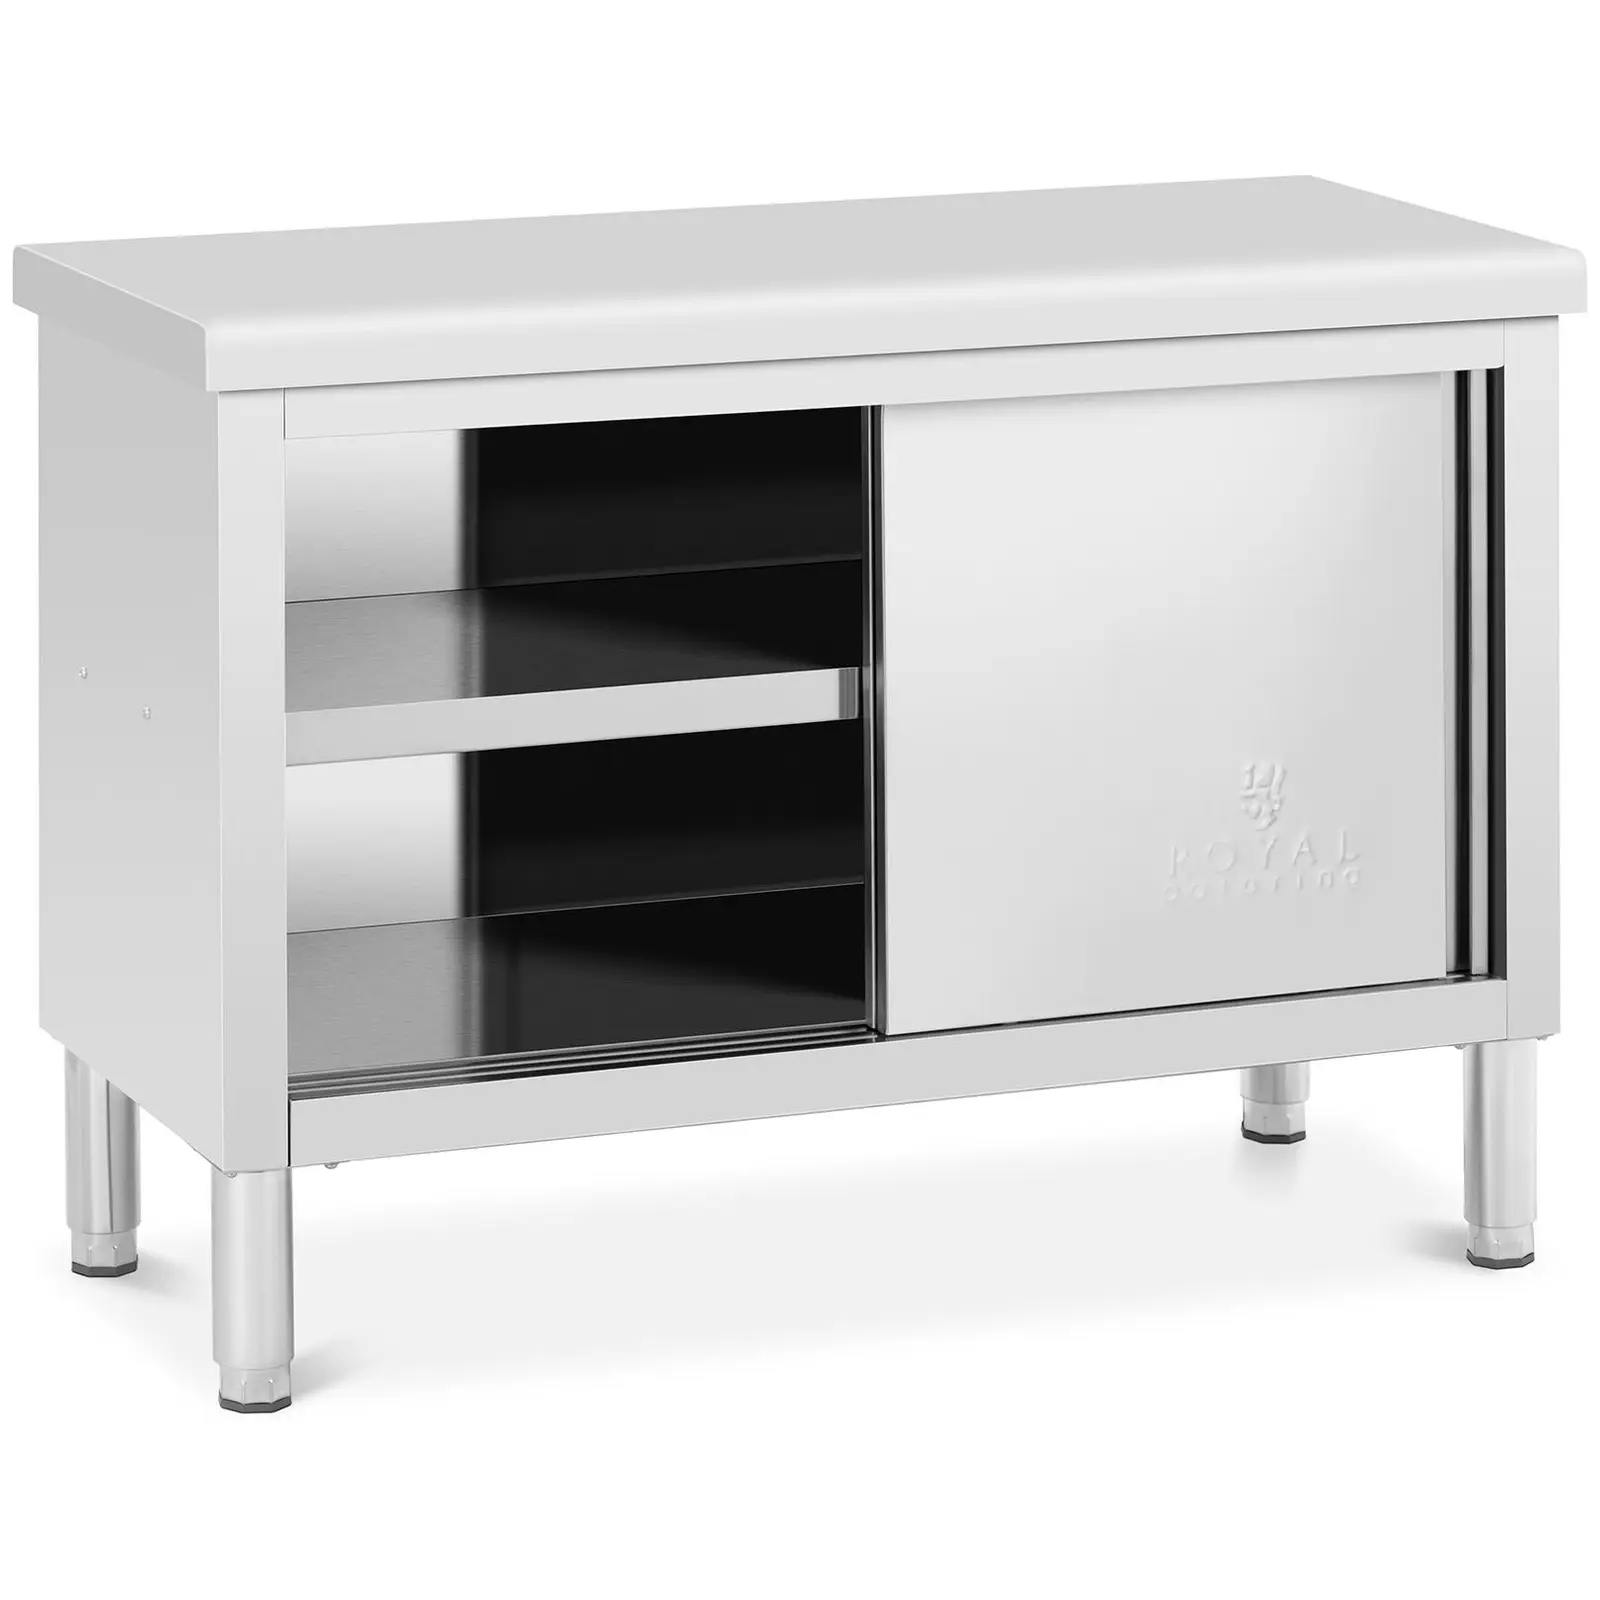 Stainless steel work cabinet - 120 x 50 cm - 330 kg capacity - Royal Catering